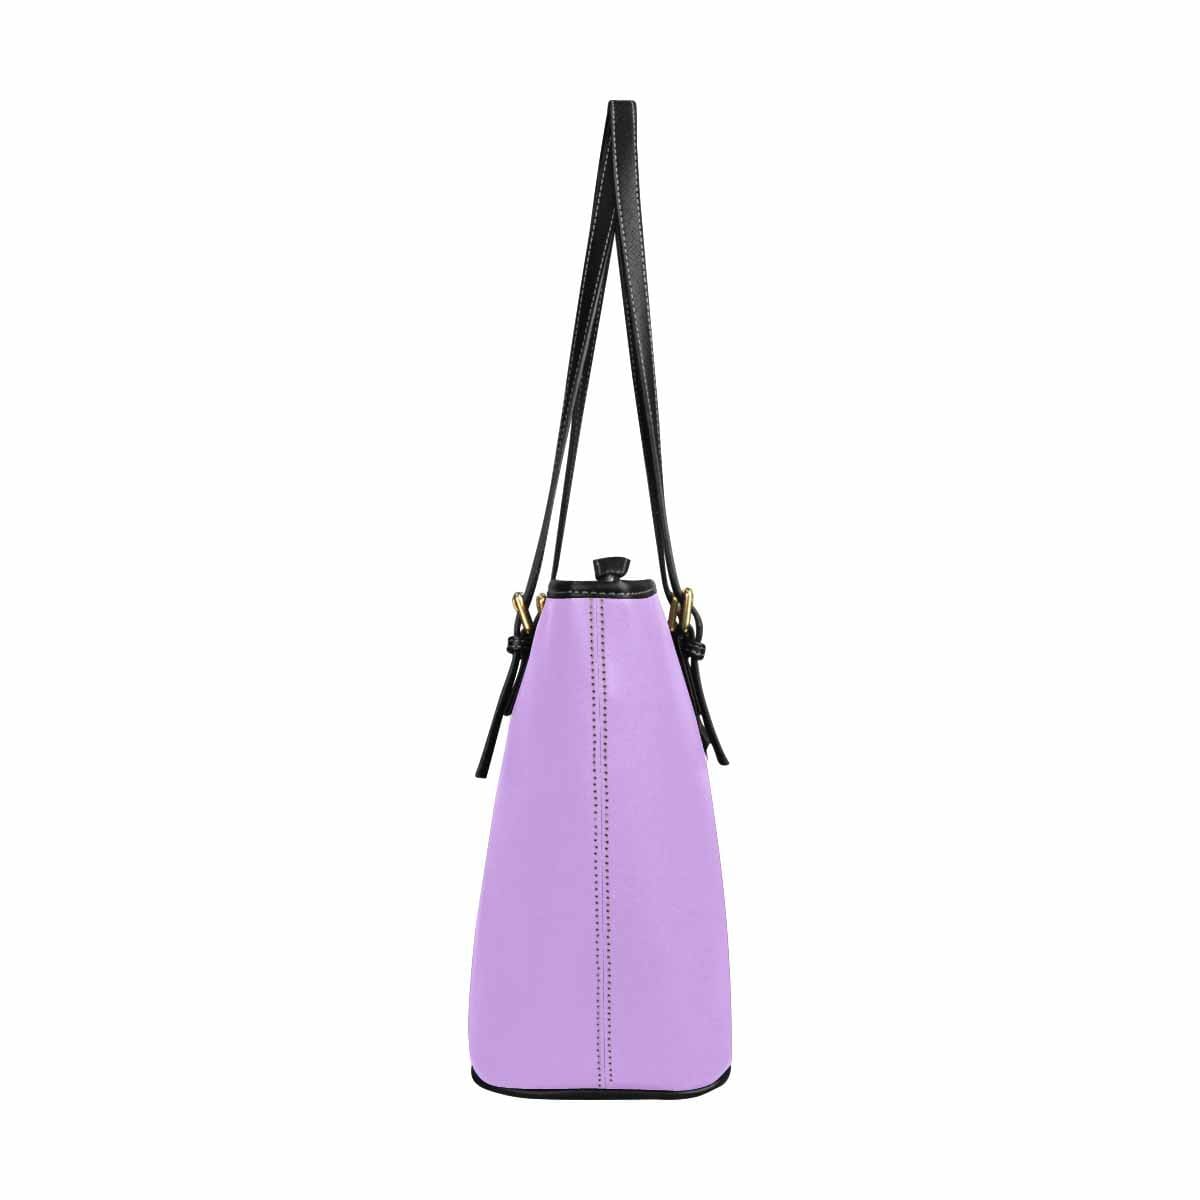 Large Leather Tote Shoulder Bag - Large Light Purple - Bags | Leather Tote Bags